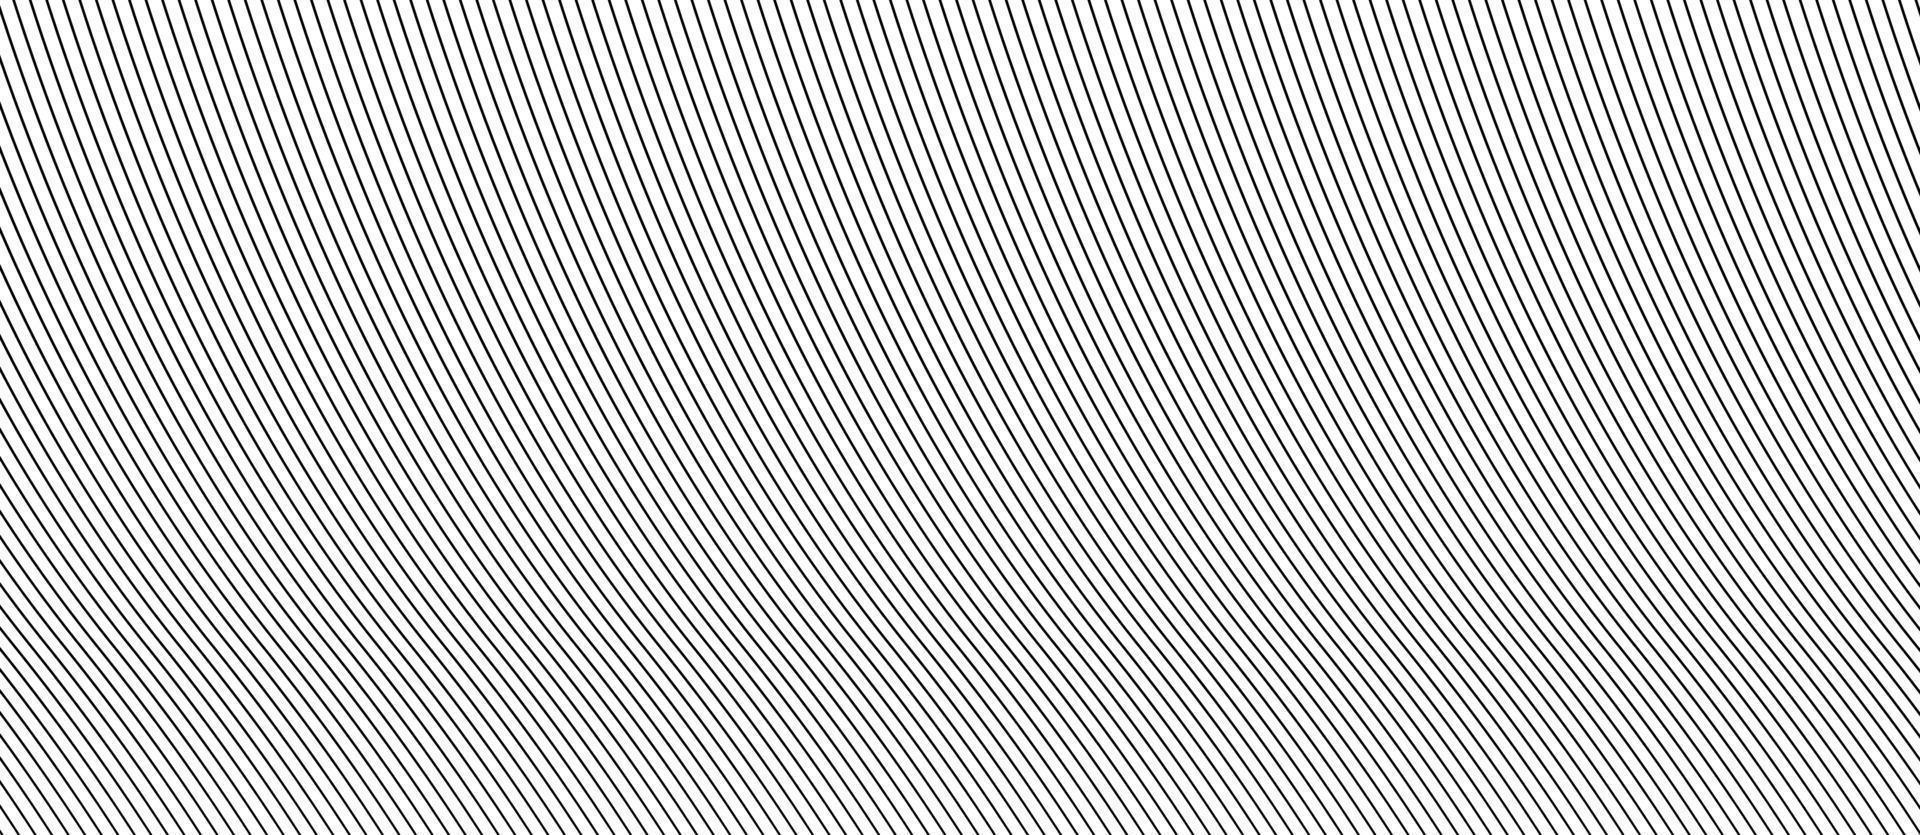 abstract pattern of lines on white background. Abstract white background with lines vector